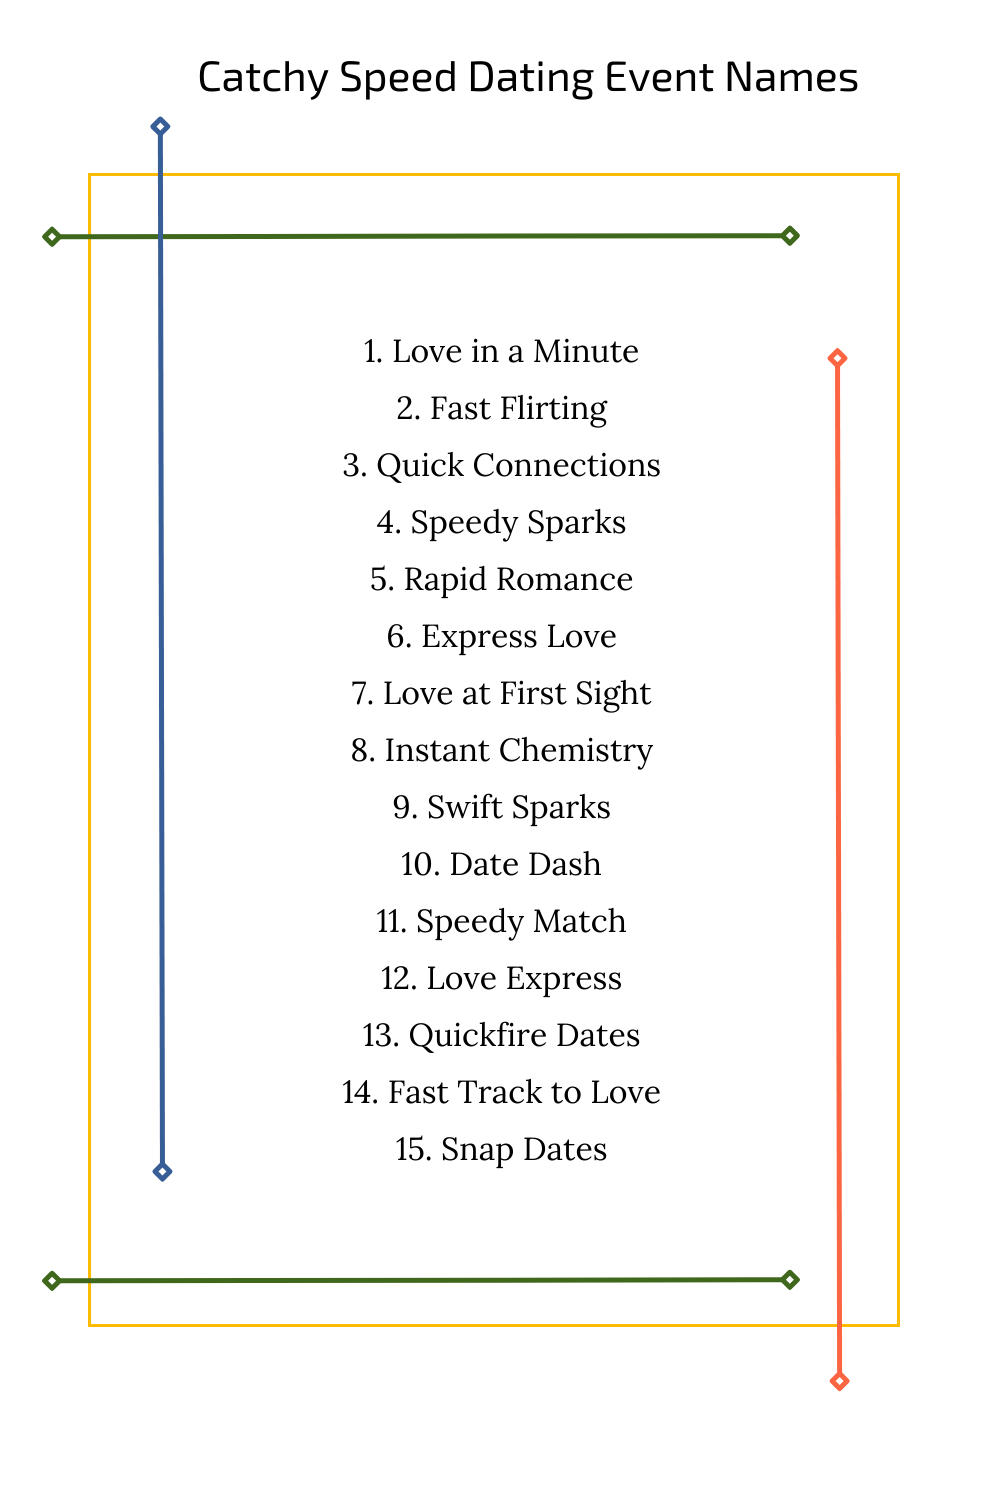 Catchy Speed Dating Event Names